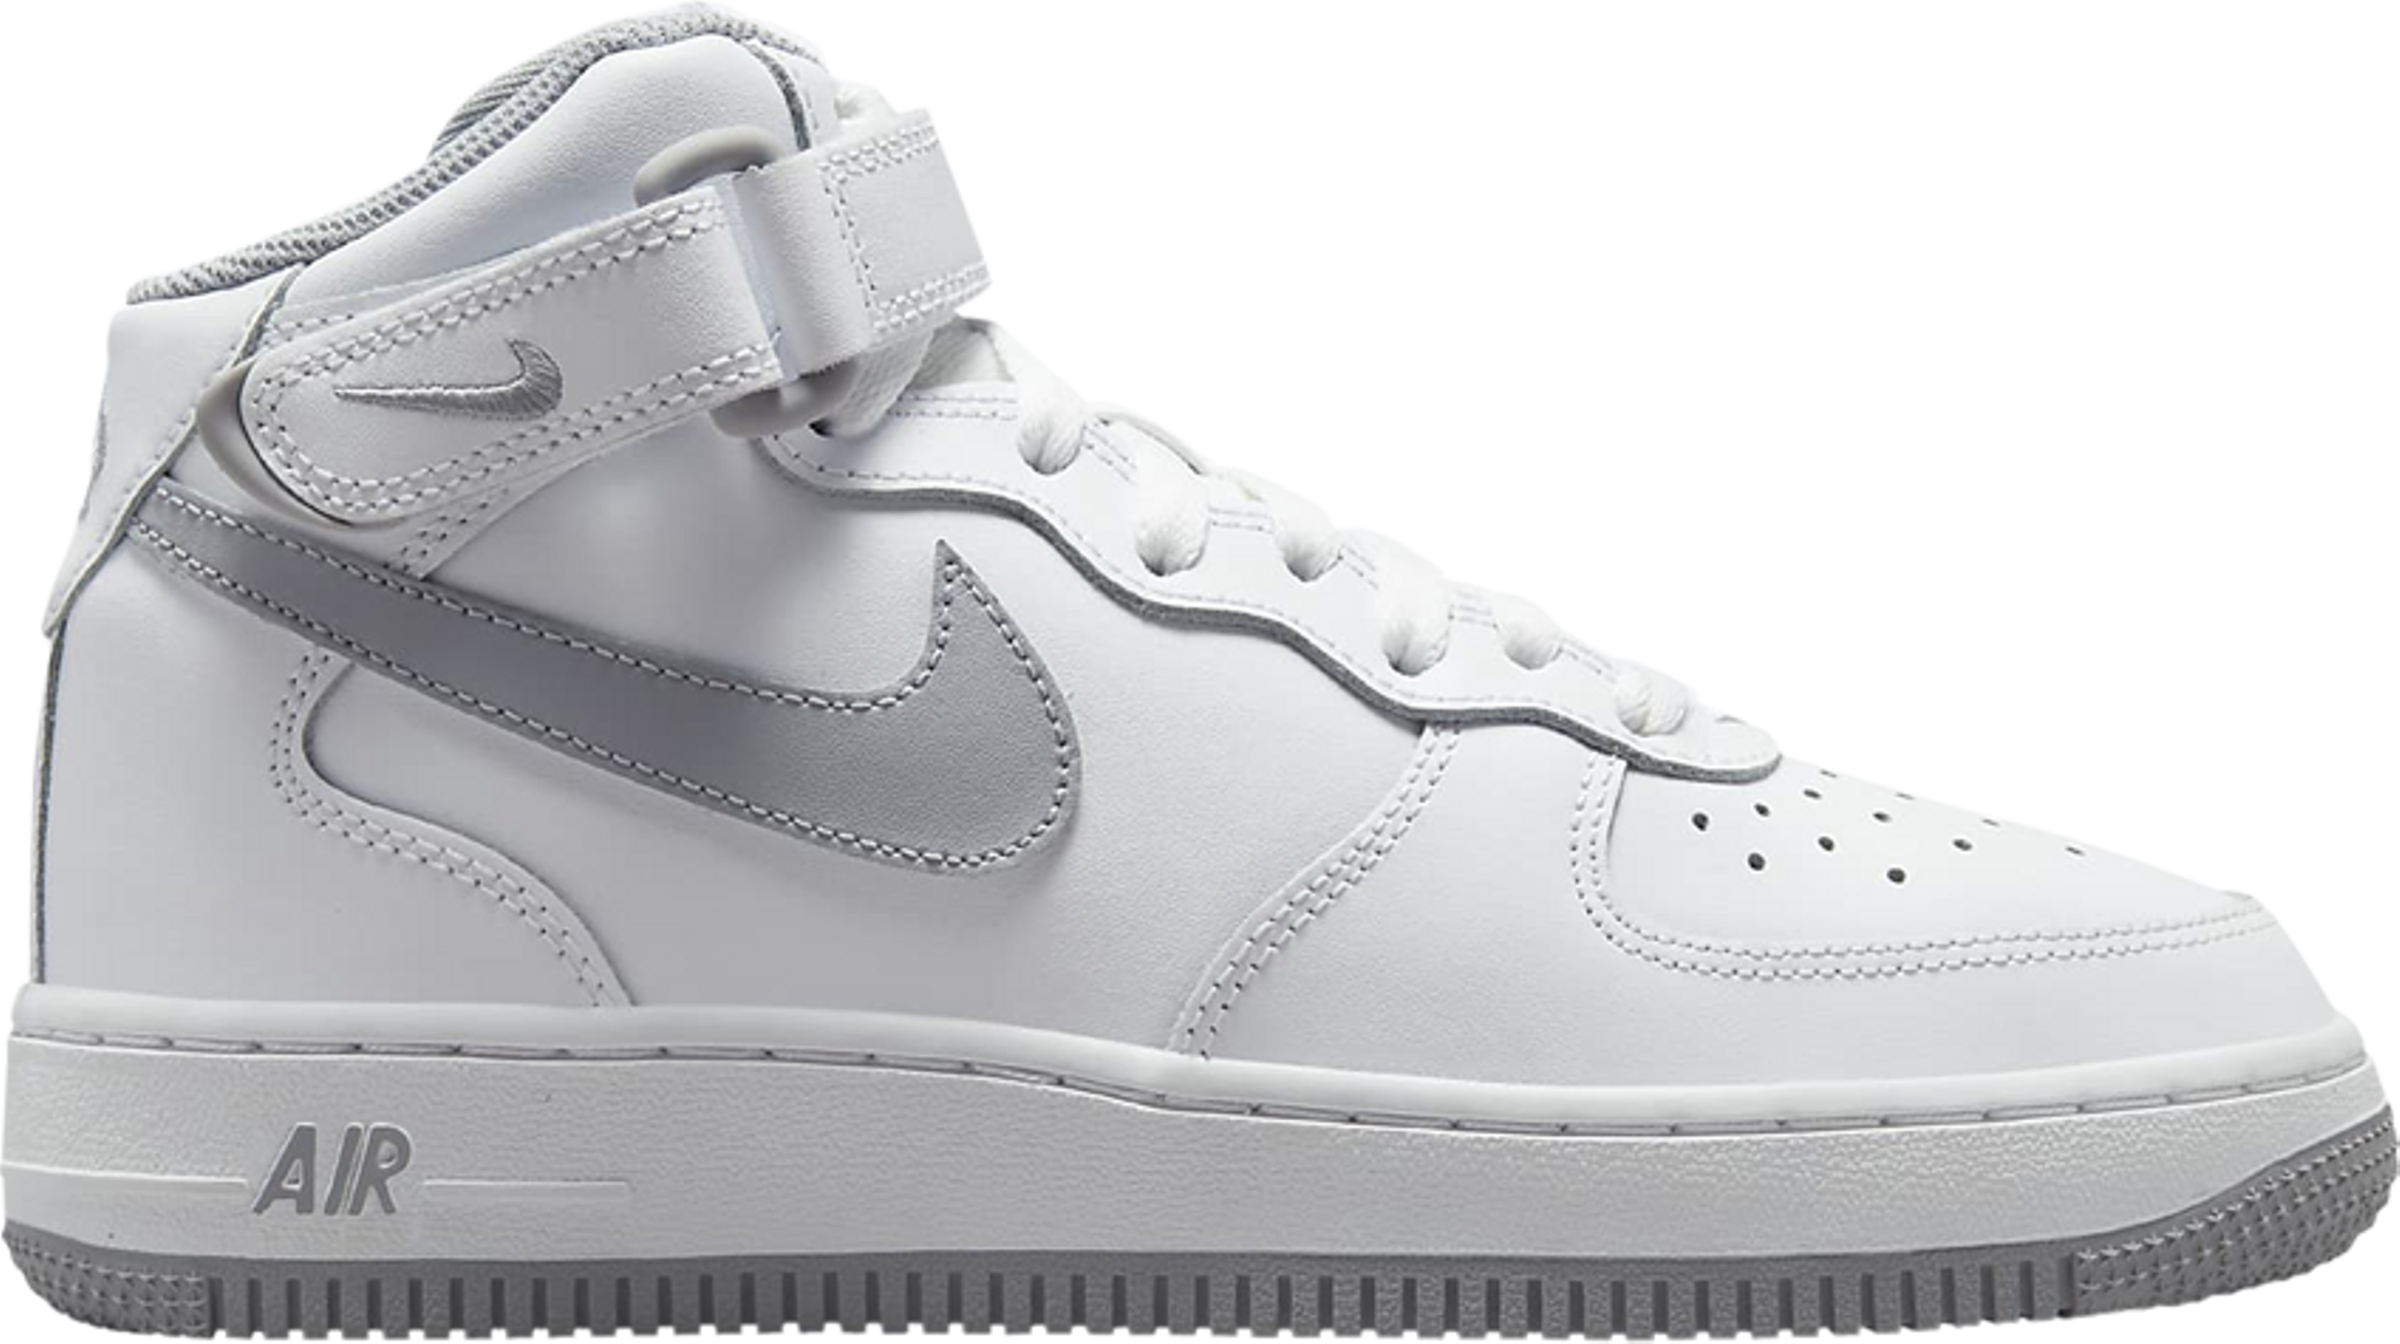 Buy Air Force 1 Mid LE GS 'White Wolf Grey' - DH2933 101 | GOAT